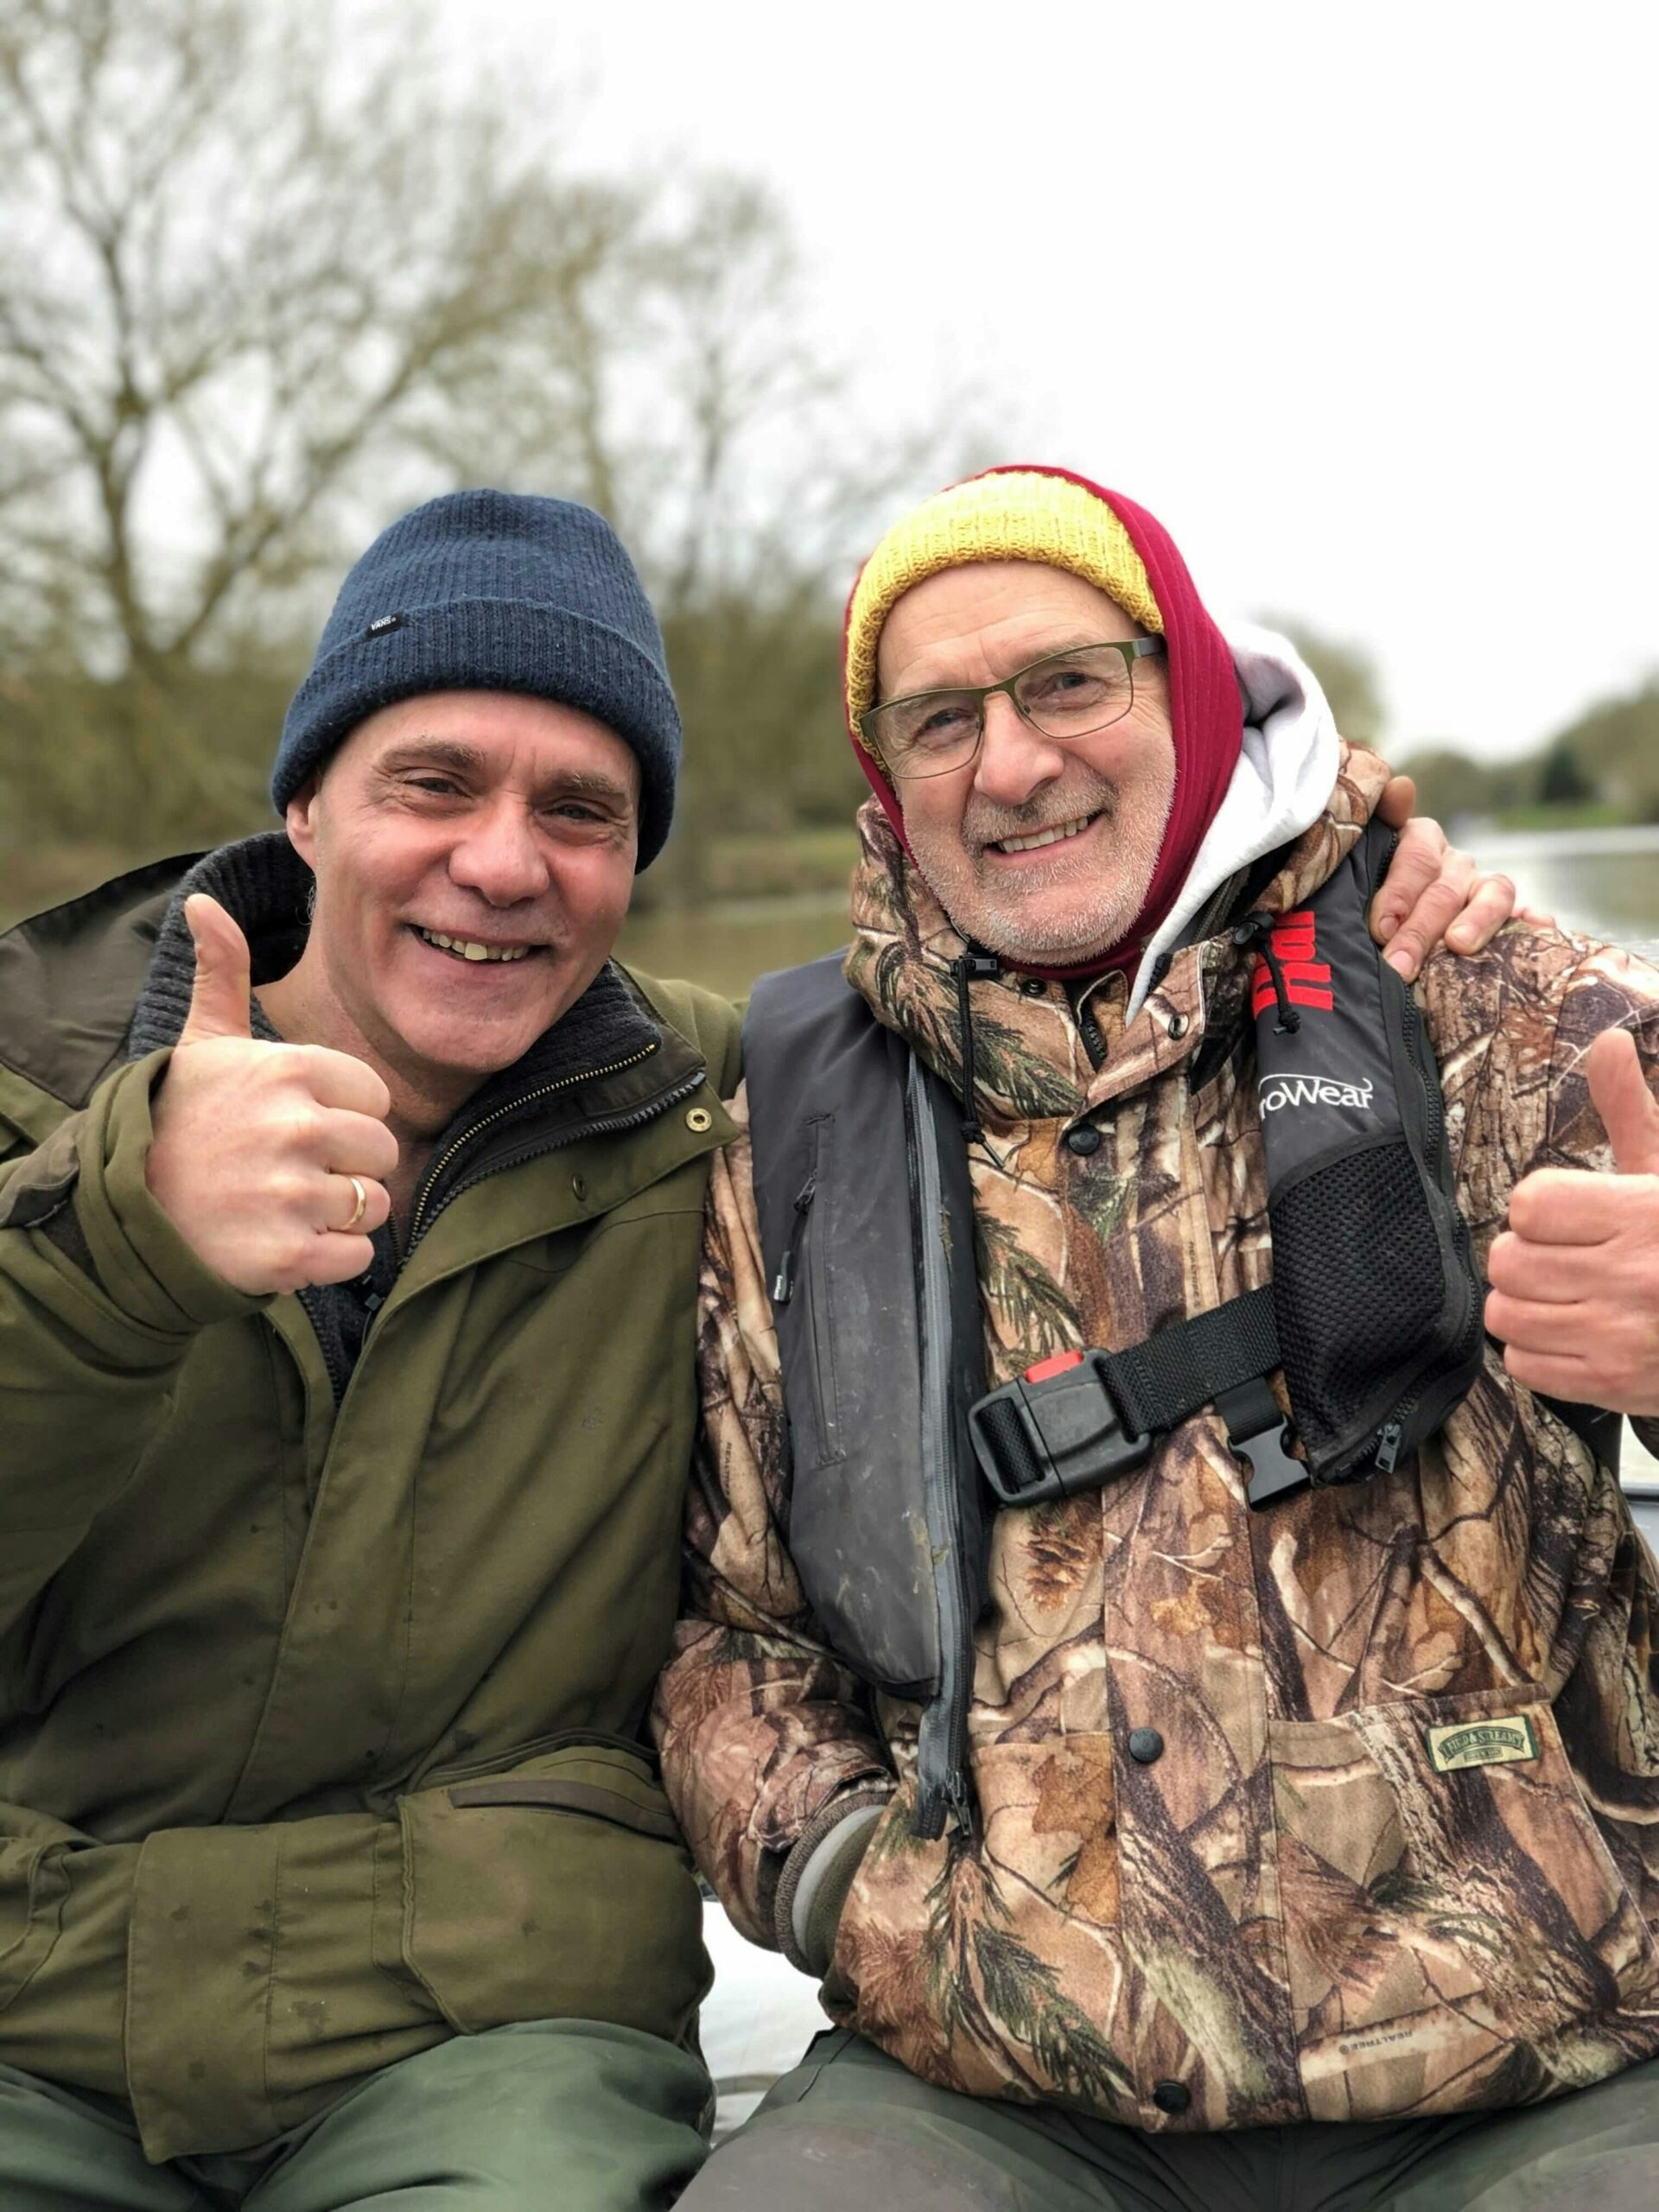 Matt and Mick are one of the best known fishing duos.